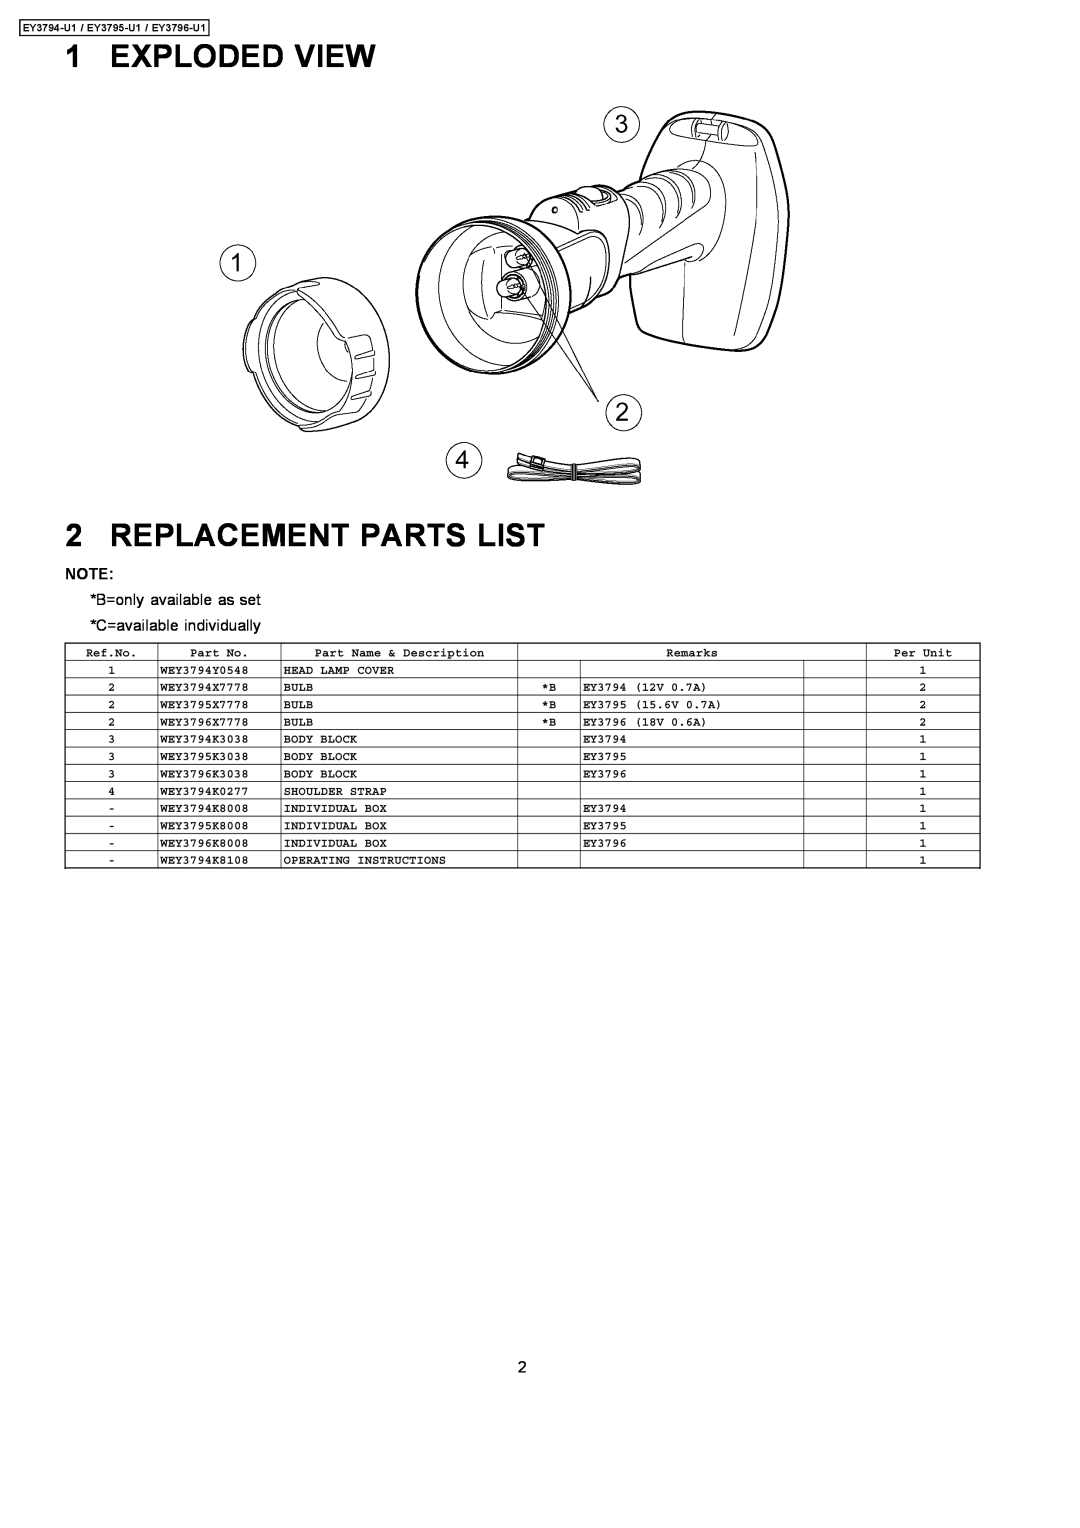 Panasonic EY3794-U1 EXPLODED VIEW 2 REPLACEMENT PARTS LIST, B=only available as set *C=available individually 